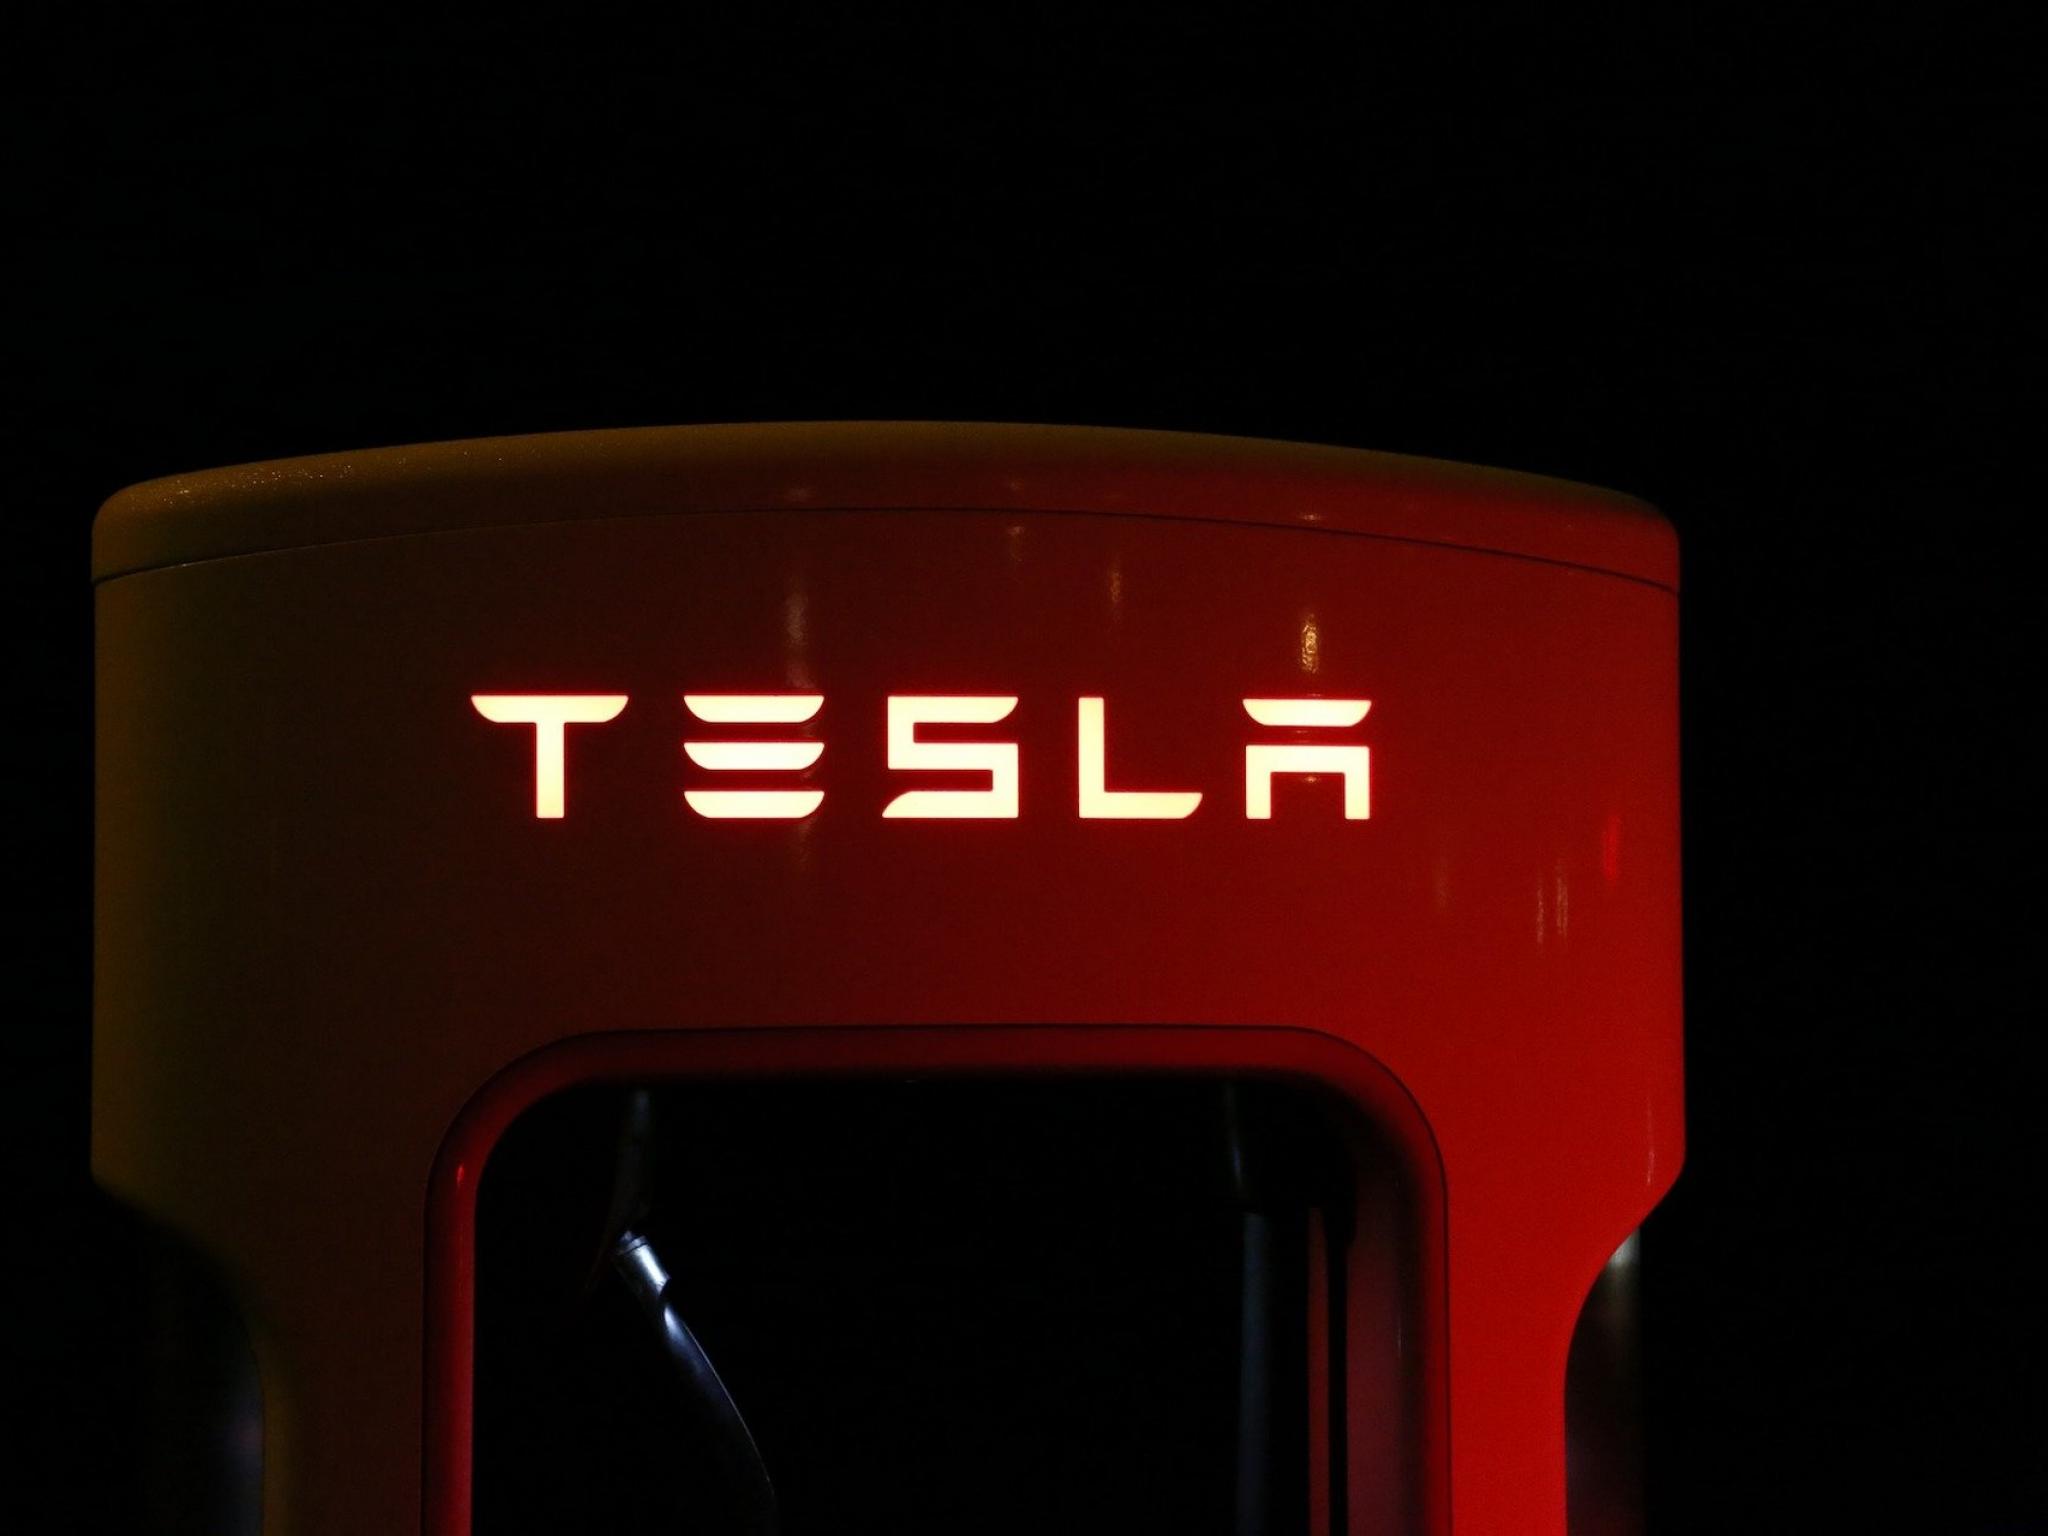  tesla-supplier-panasonic-showcases-ev-battery-for-tesla-what-you-need-to-know 